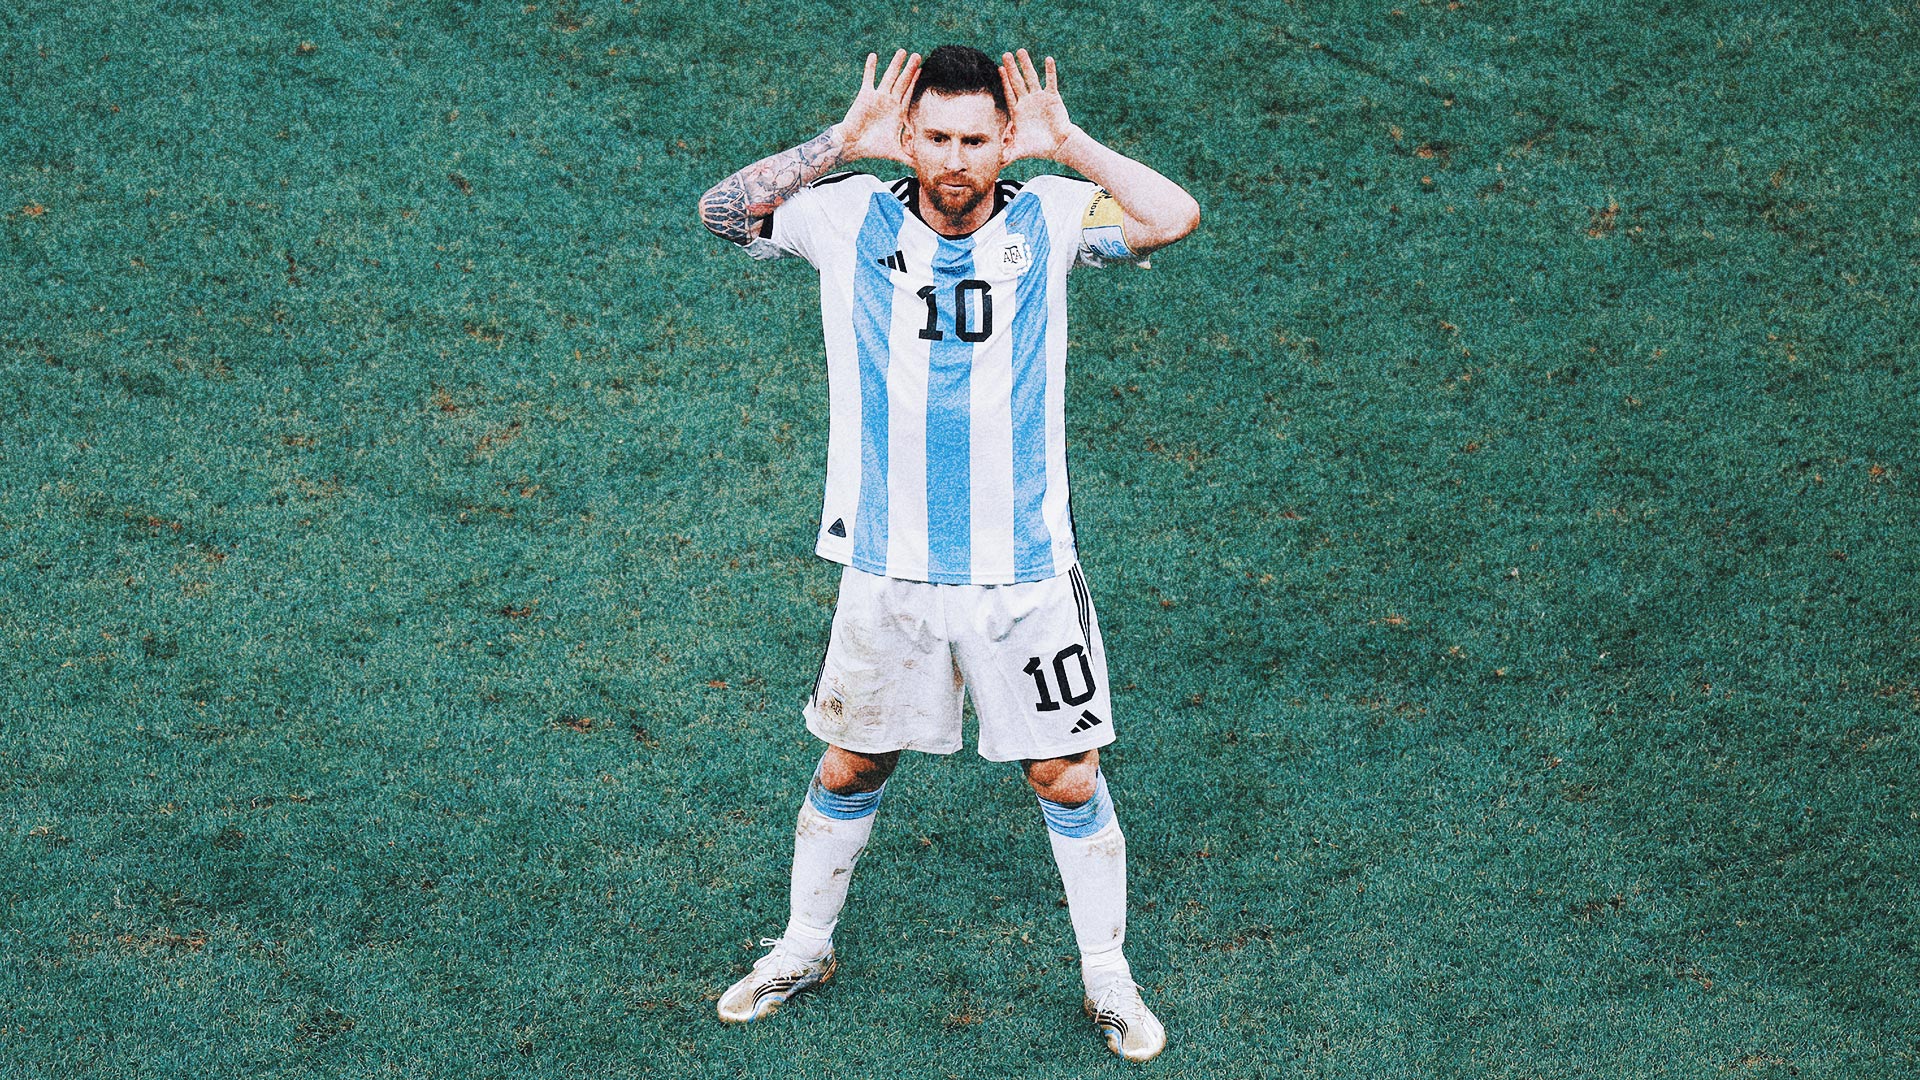 Lionel Messi on rally vs. Netherlands: ‘We have a weight off our shoulders’